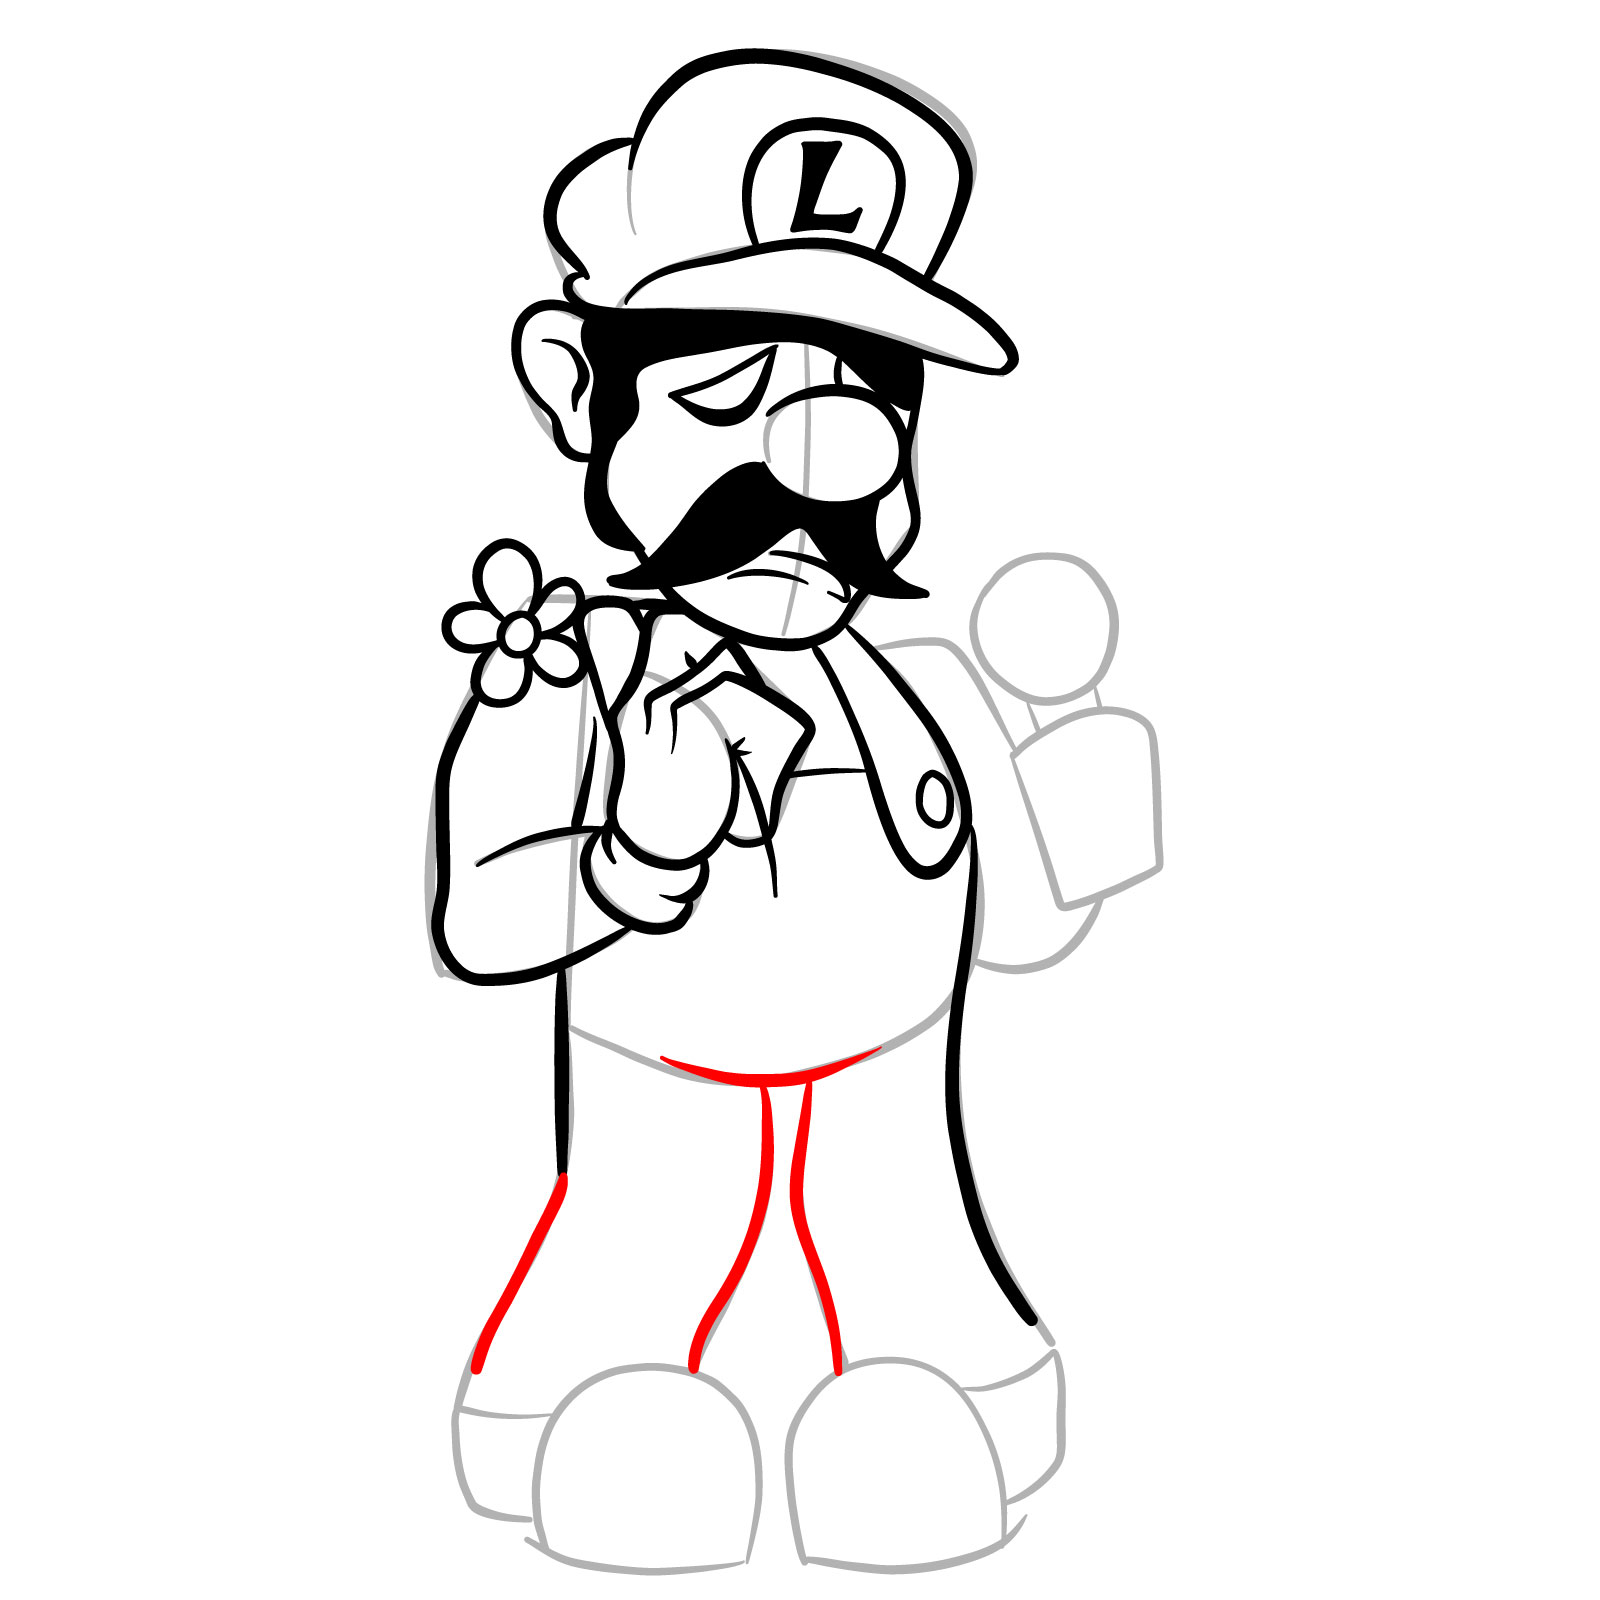 How to draw Beta Luigi from FNF - step 24